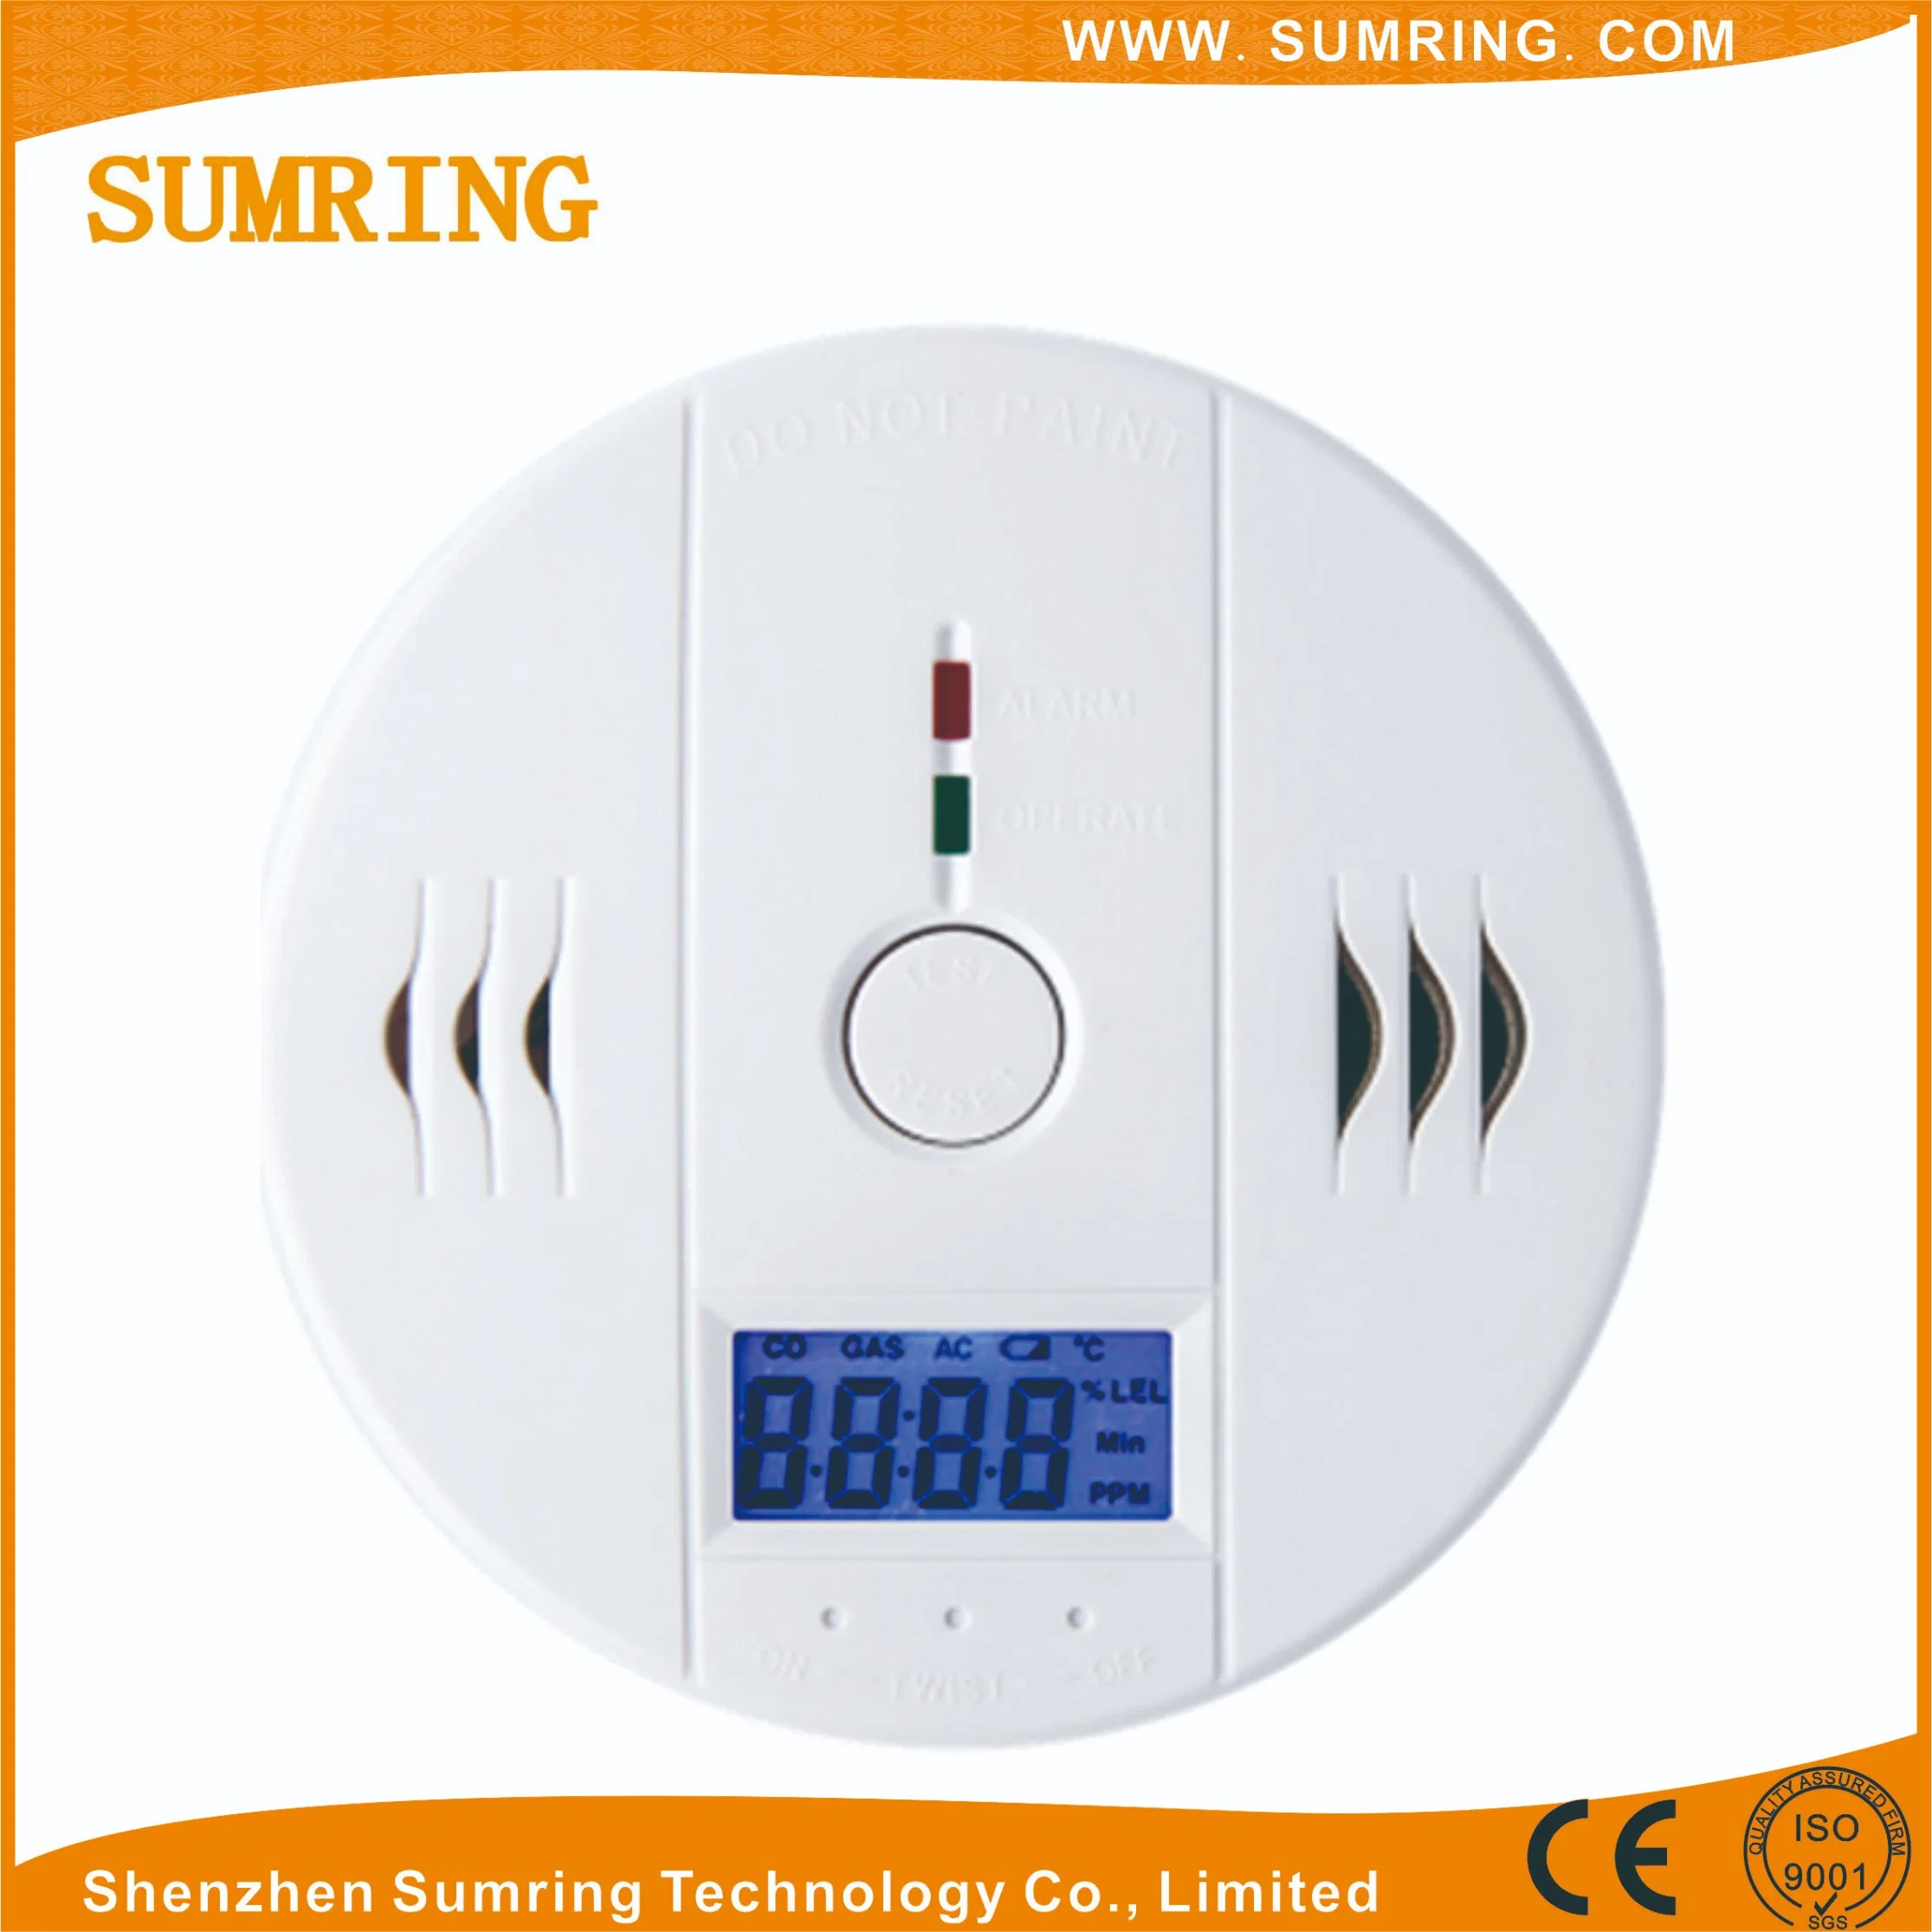 Real Function Co Gas Detector/Carbon Monoxide Alarm with LCD Display